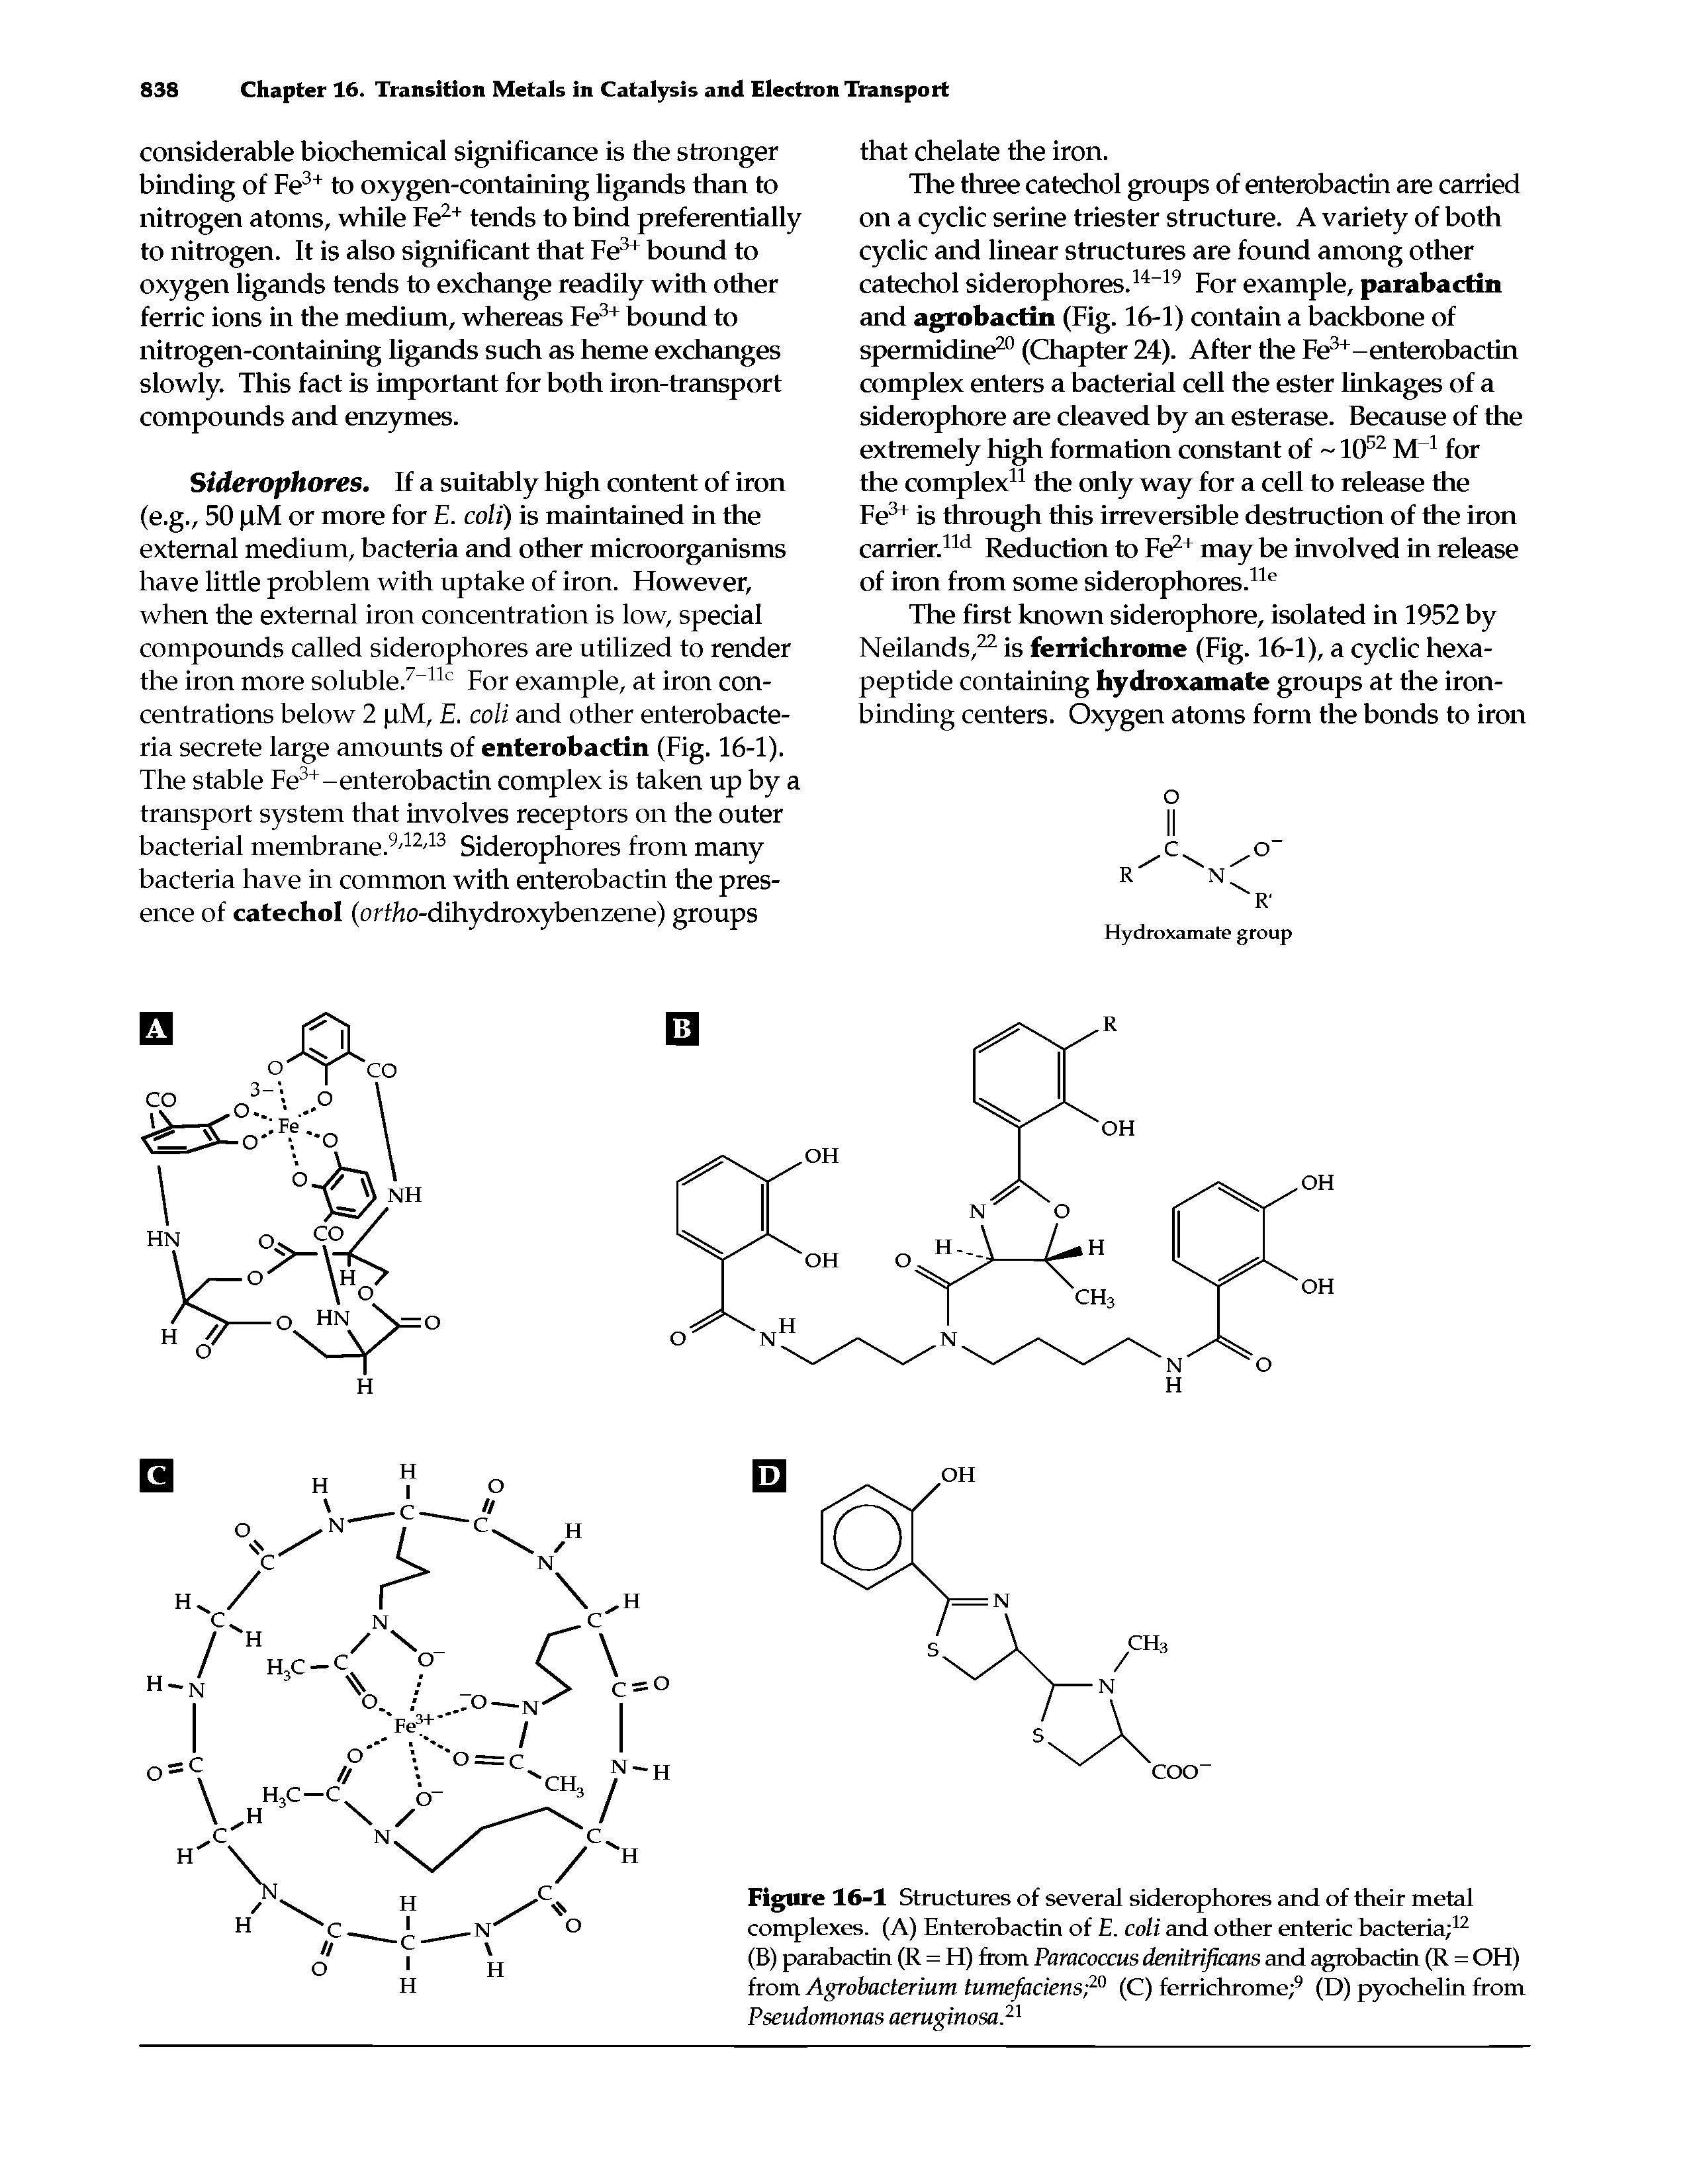 Figure 16-1 Structures of several siderophores and of their metal complexes. (A) Enterobactin of E. coli and other enteric bacteria 12 (B) parabactin (R = H) from Paracoccus denitrijkans and agrobactin (R = OH) from Agrobacterium tumefaciens 20 (C) ferrichrome 9 (D) pyochelin from Pseudomonas aeruginosa.21...